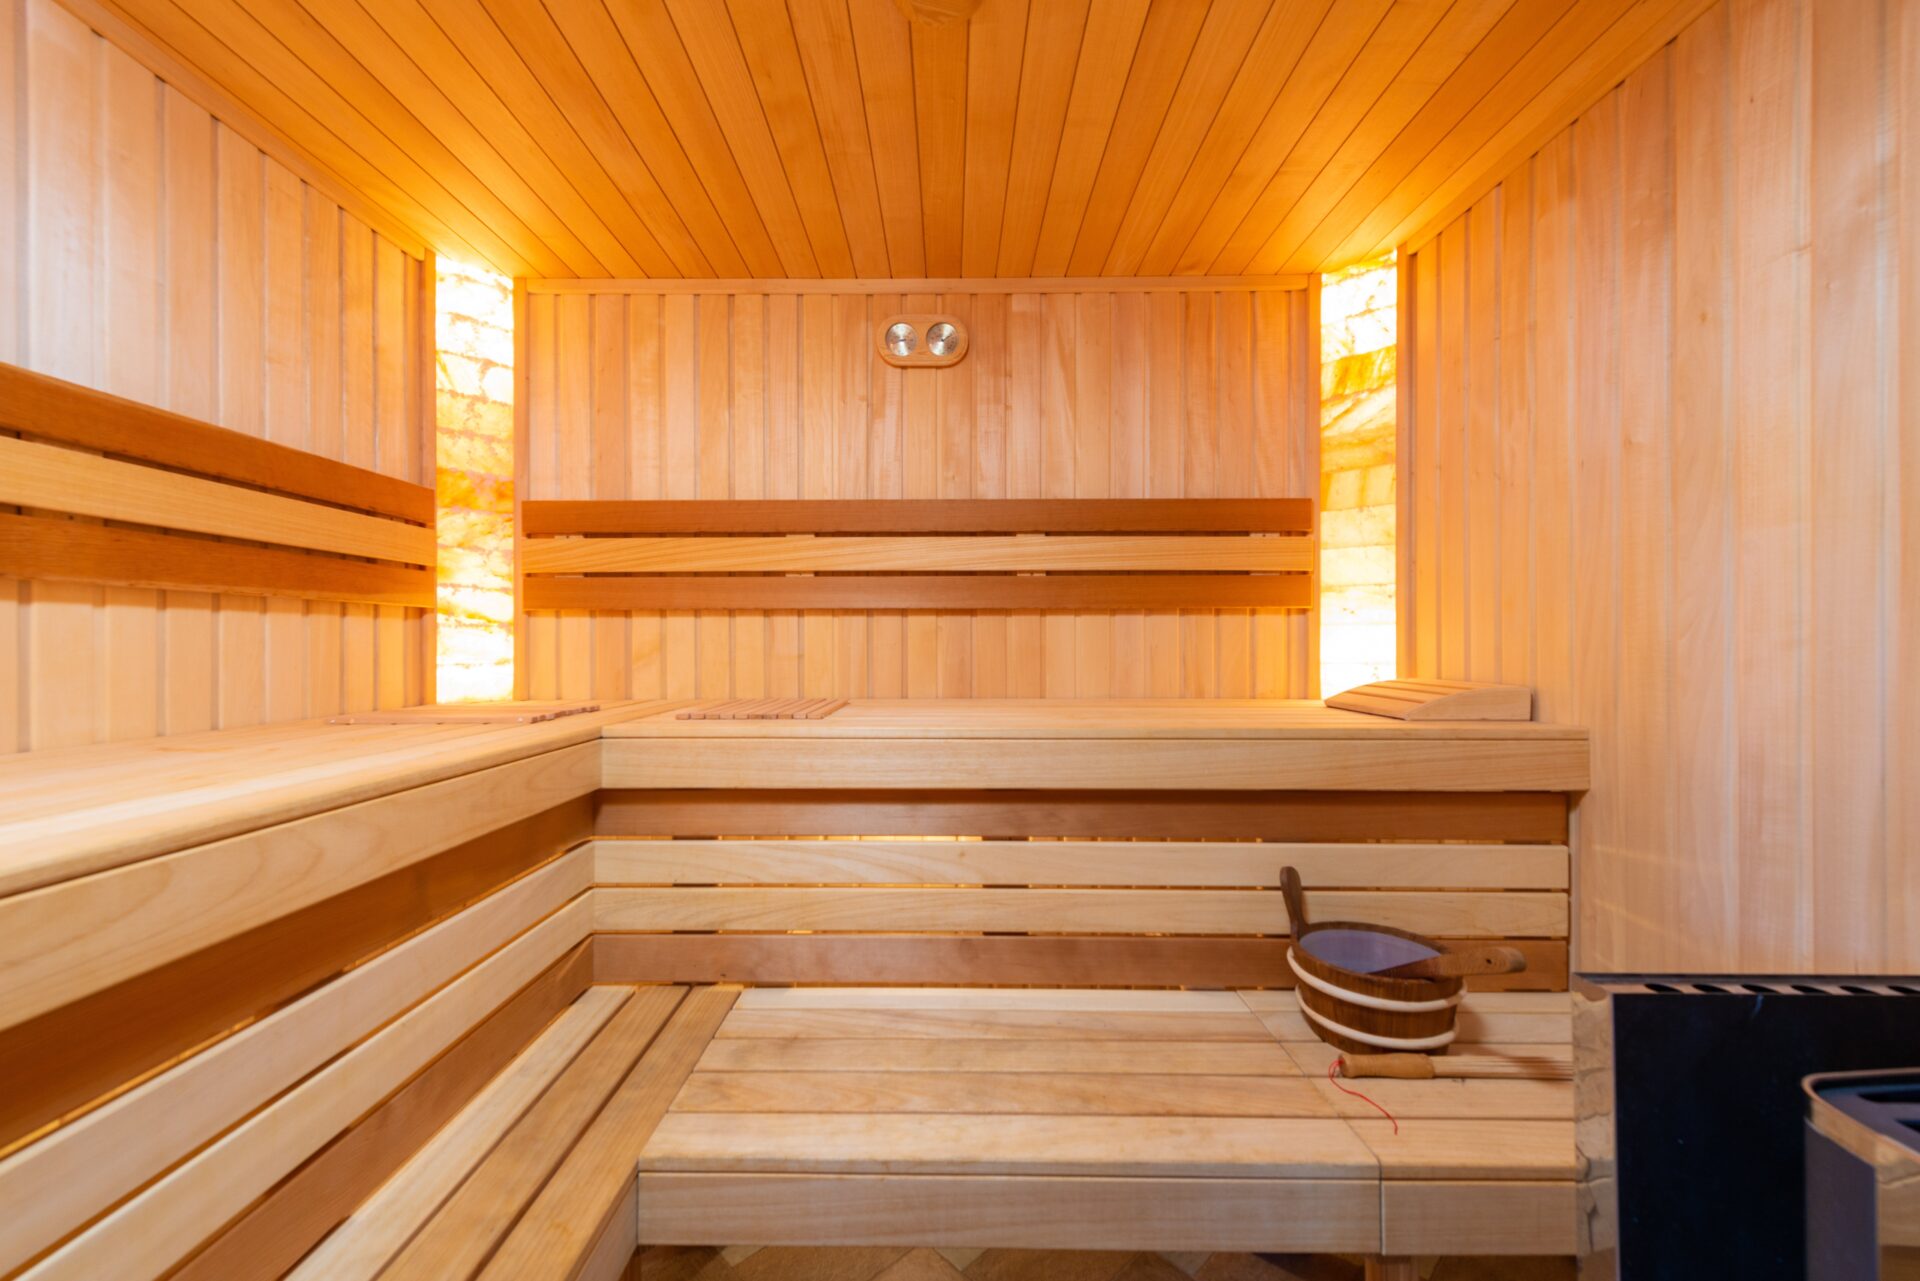 Sauna cardiovascular benefits from consistent sessions